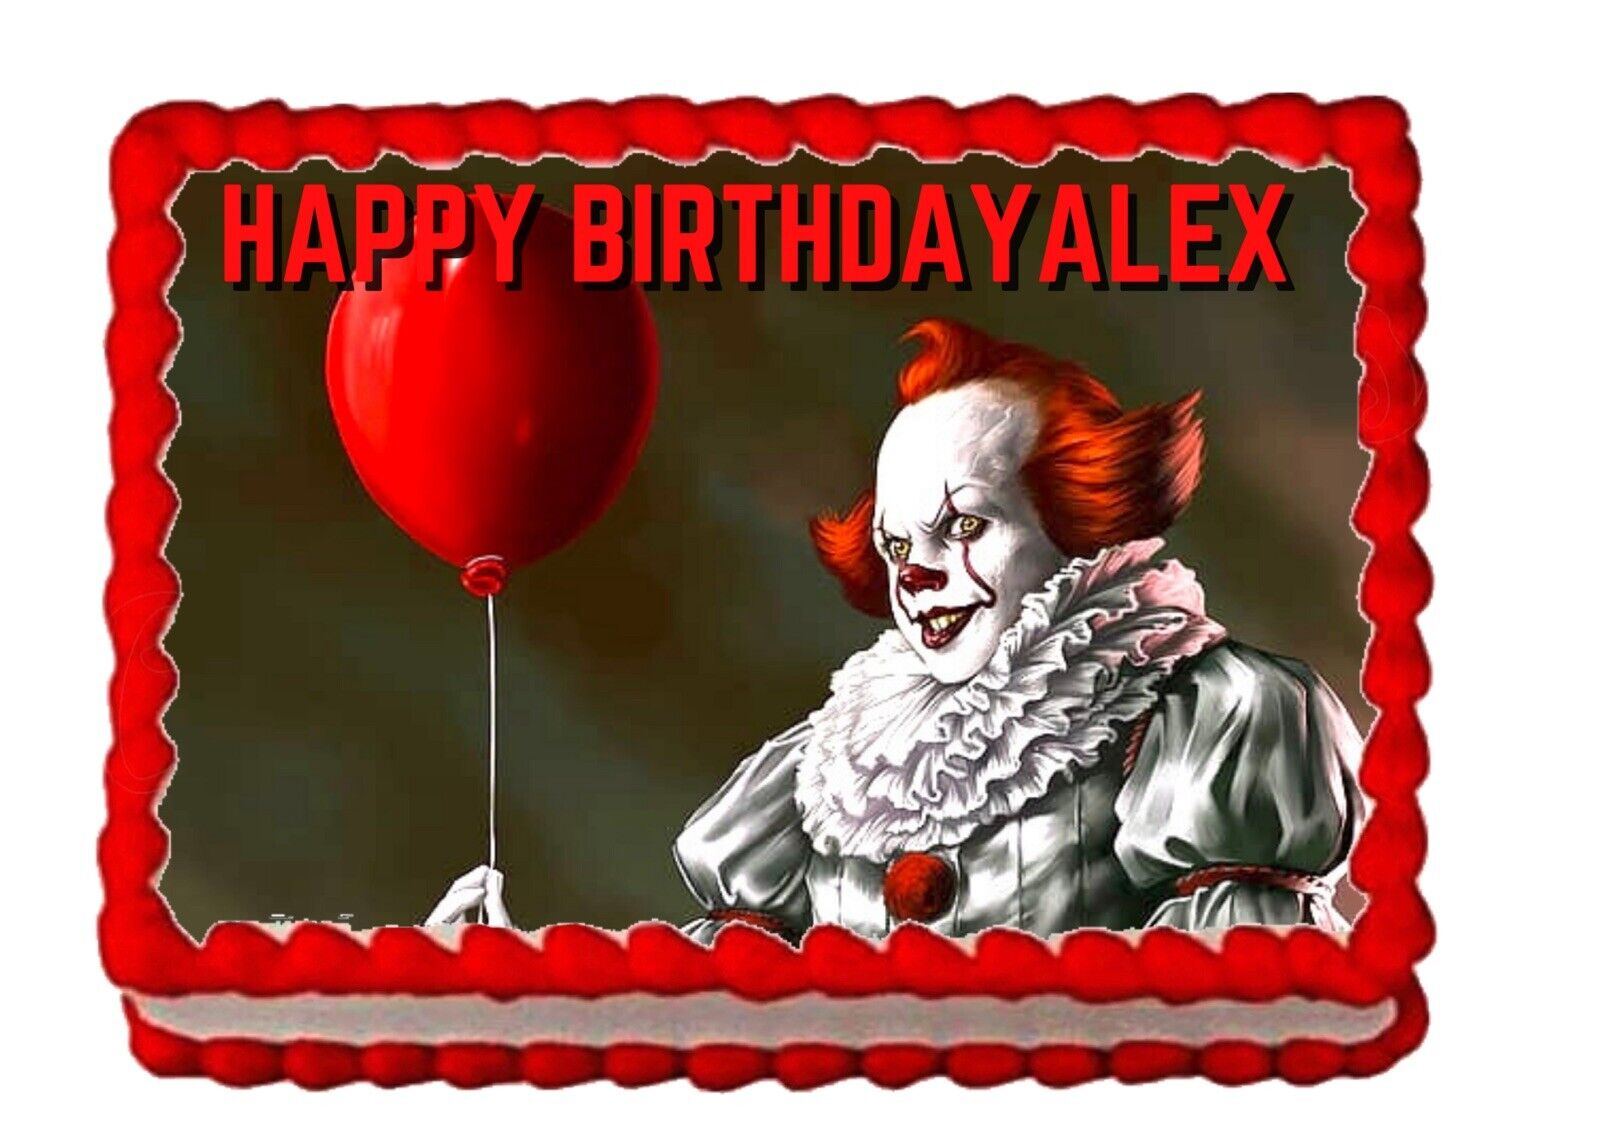 It Pennywise Red Ballon A4 Edible Icing Birthday Cake Topper Decoration